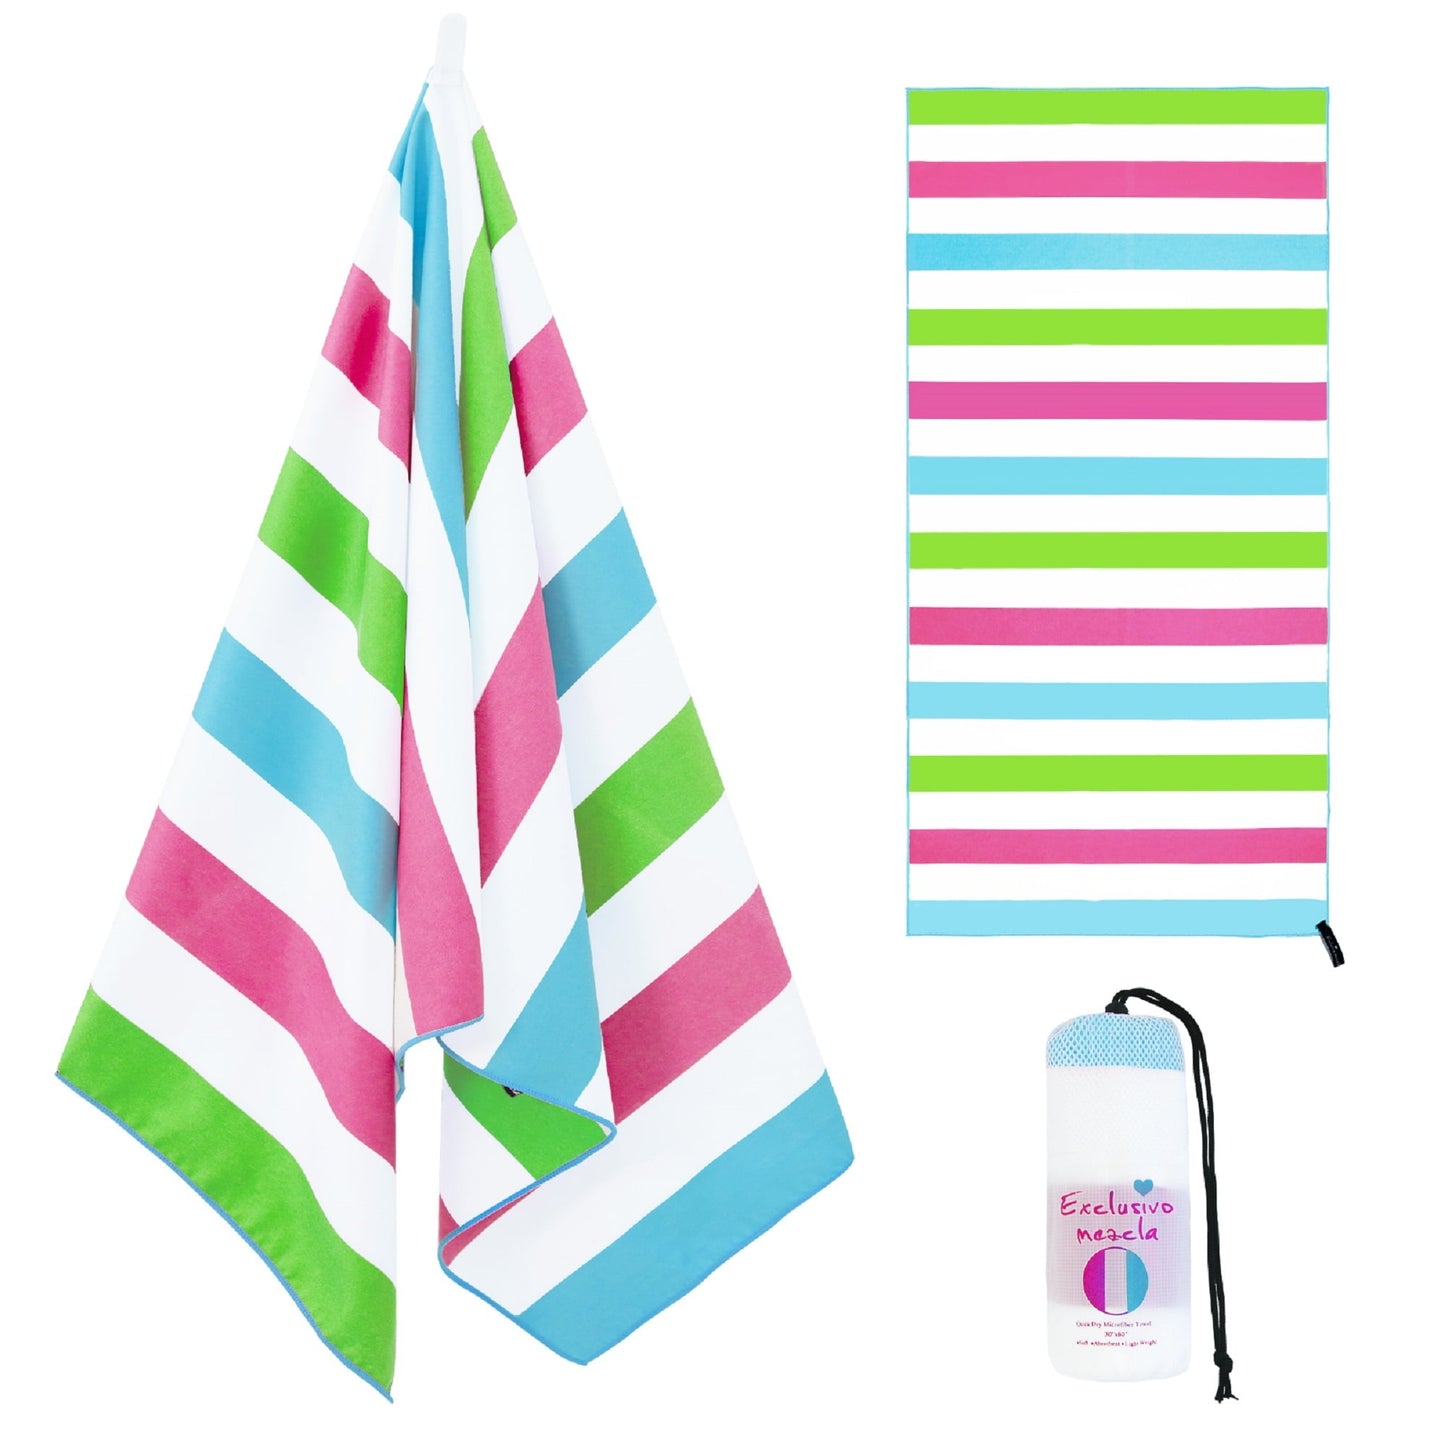 Exclusivo Mezcla Microfiber Quick Dry Beach Towel, Large Sand Free Beach Towel for Travel/Camping/Sports (Striped Multicolor, 30"X60") - Super Absorbent, Compact and Lightweight